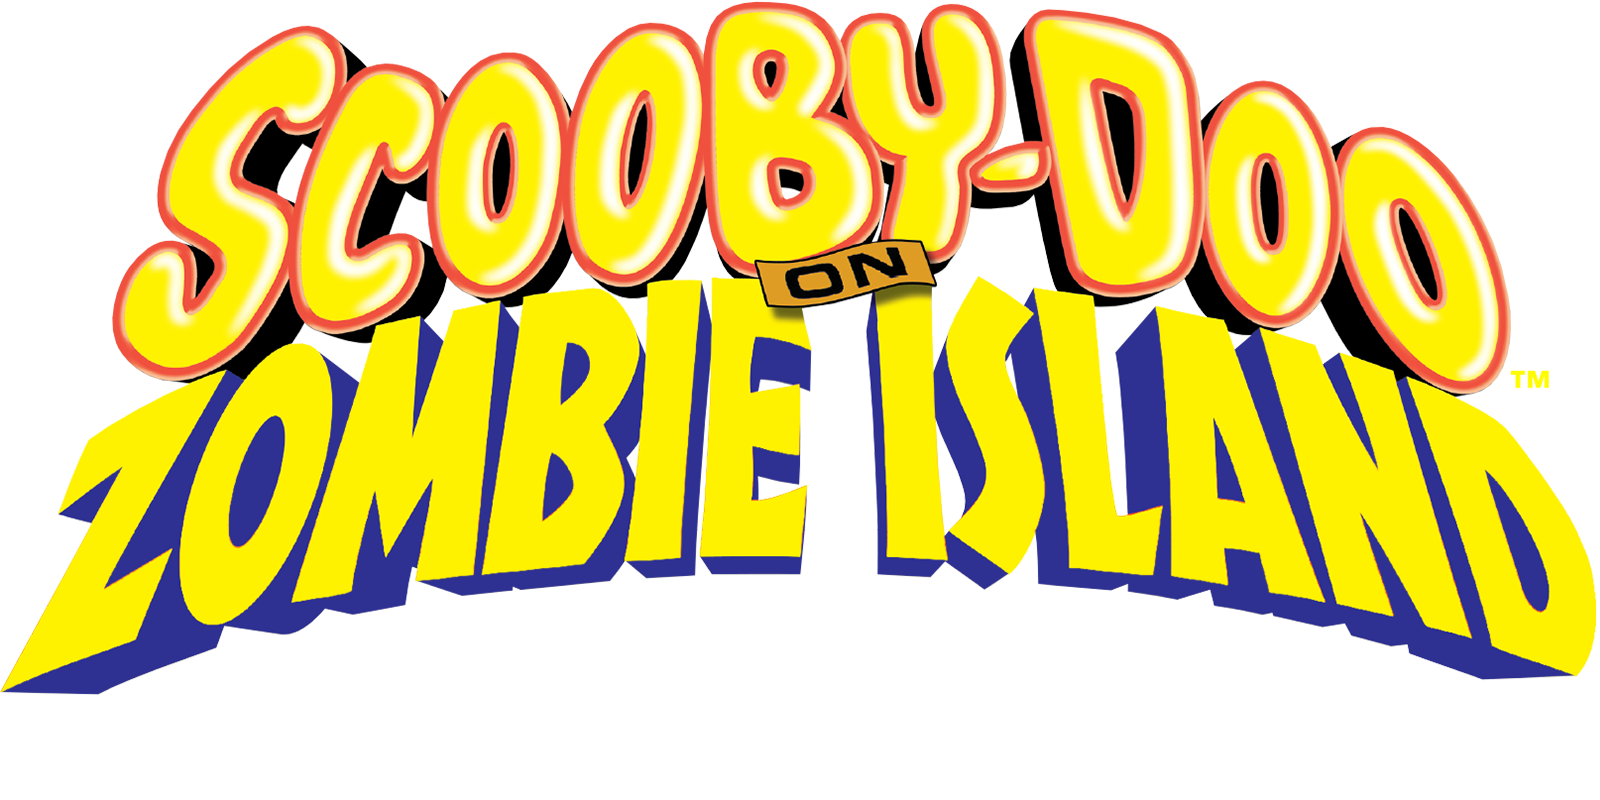 Scooby Doo Logo PNG Images Transparent Background | PNG Play